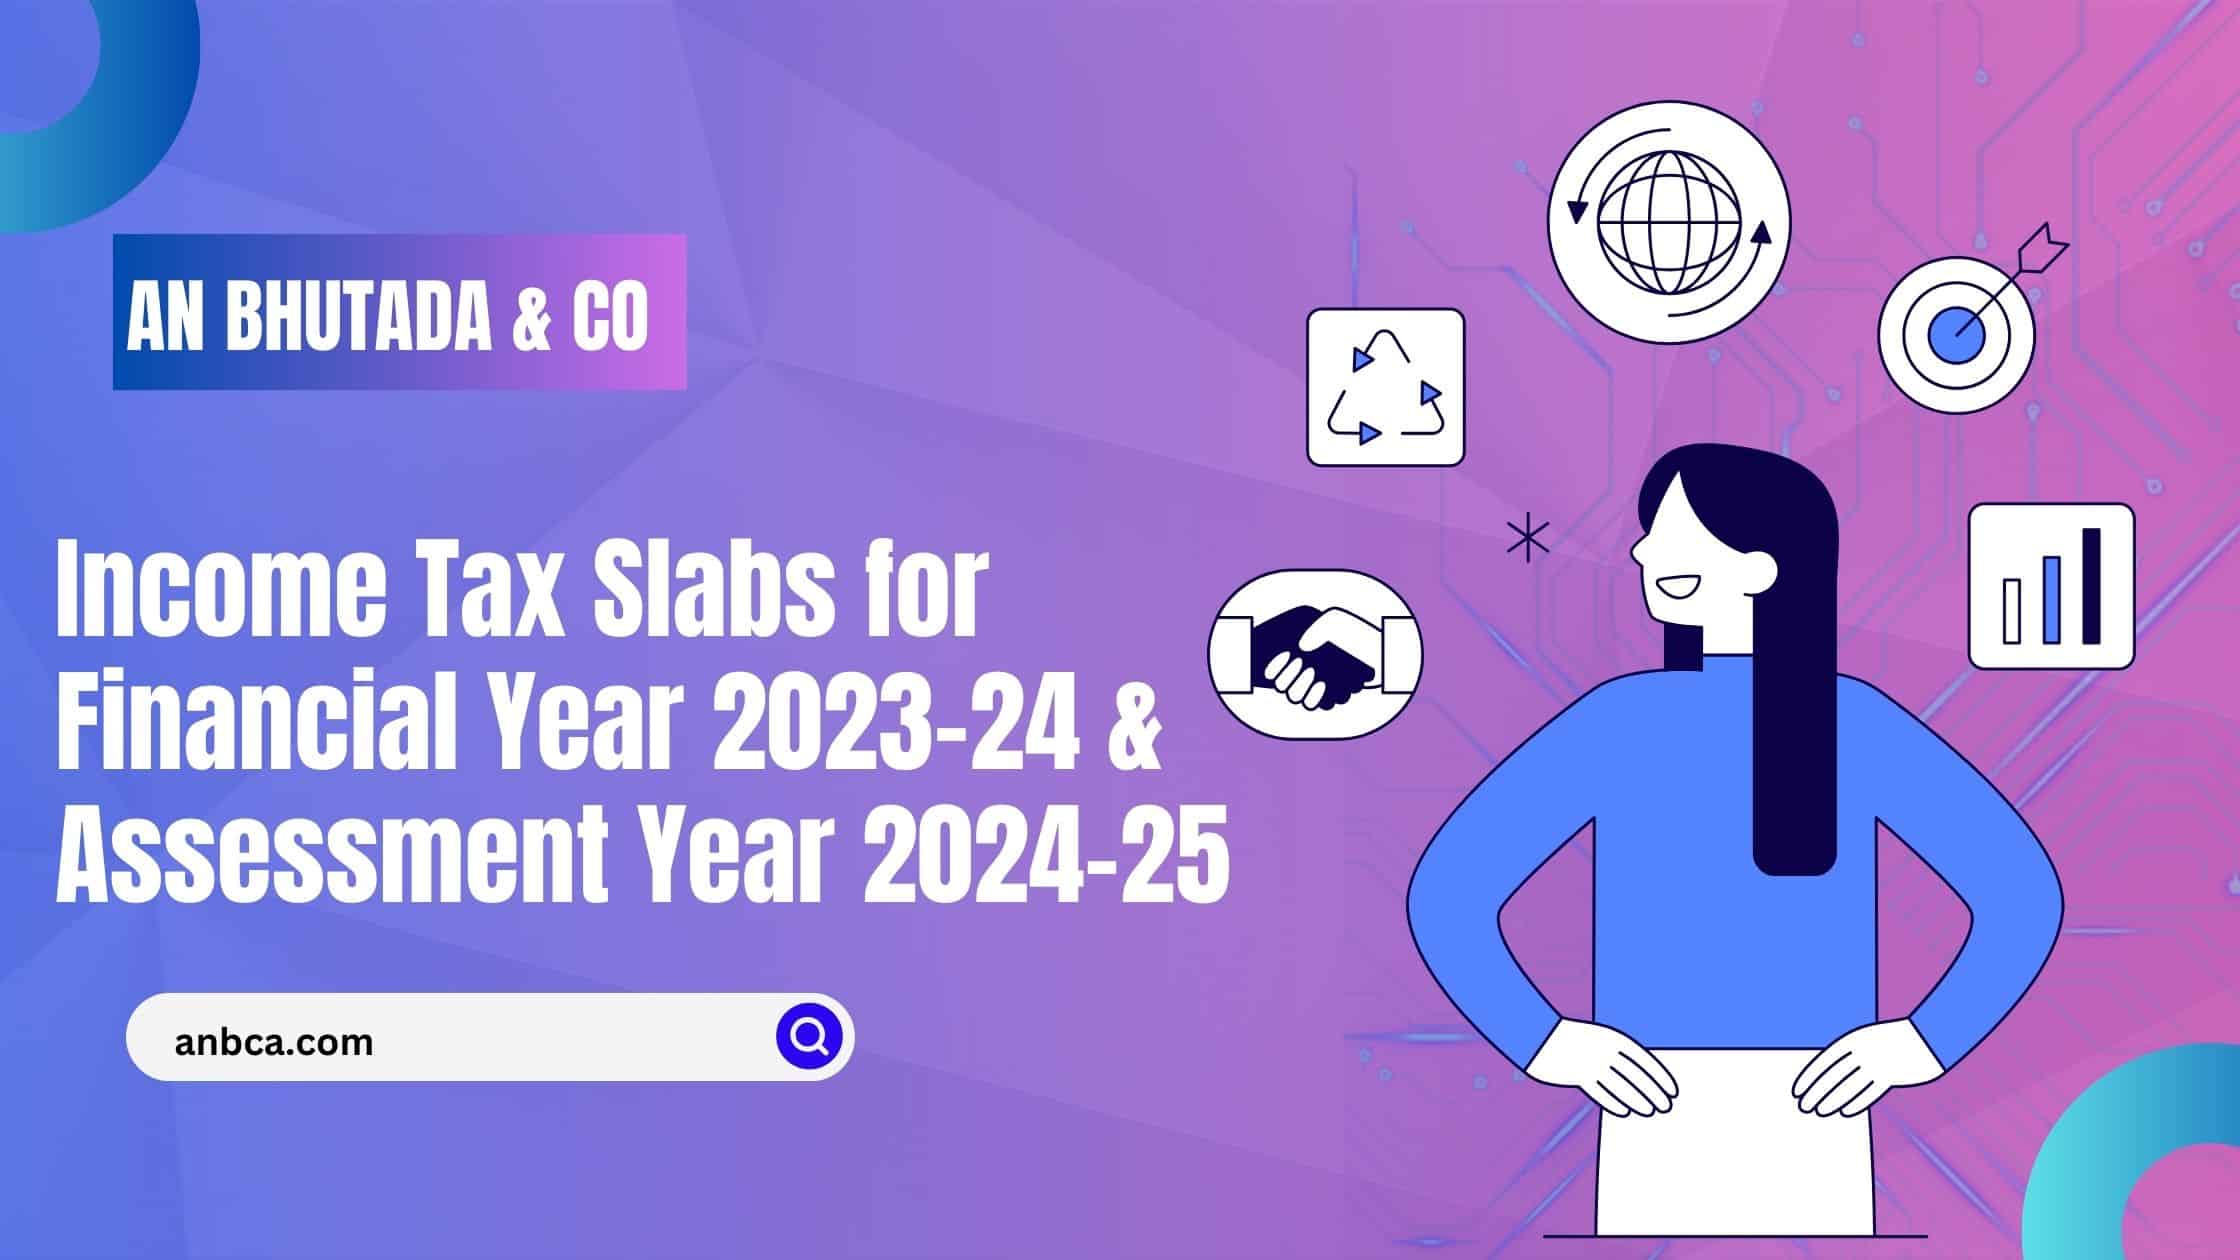 Tax Slabs for Financial Year 202324 & Assessment Year 202425